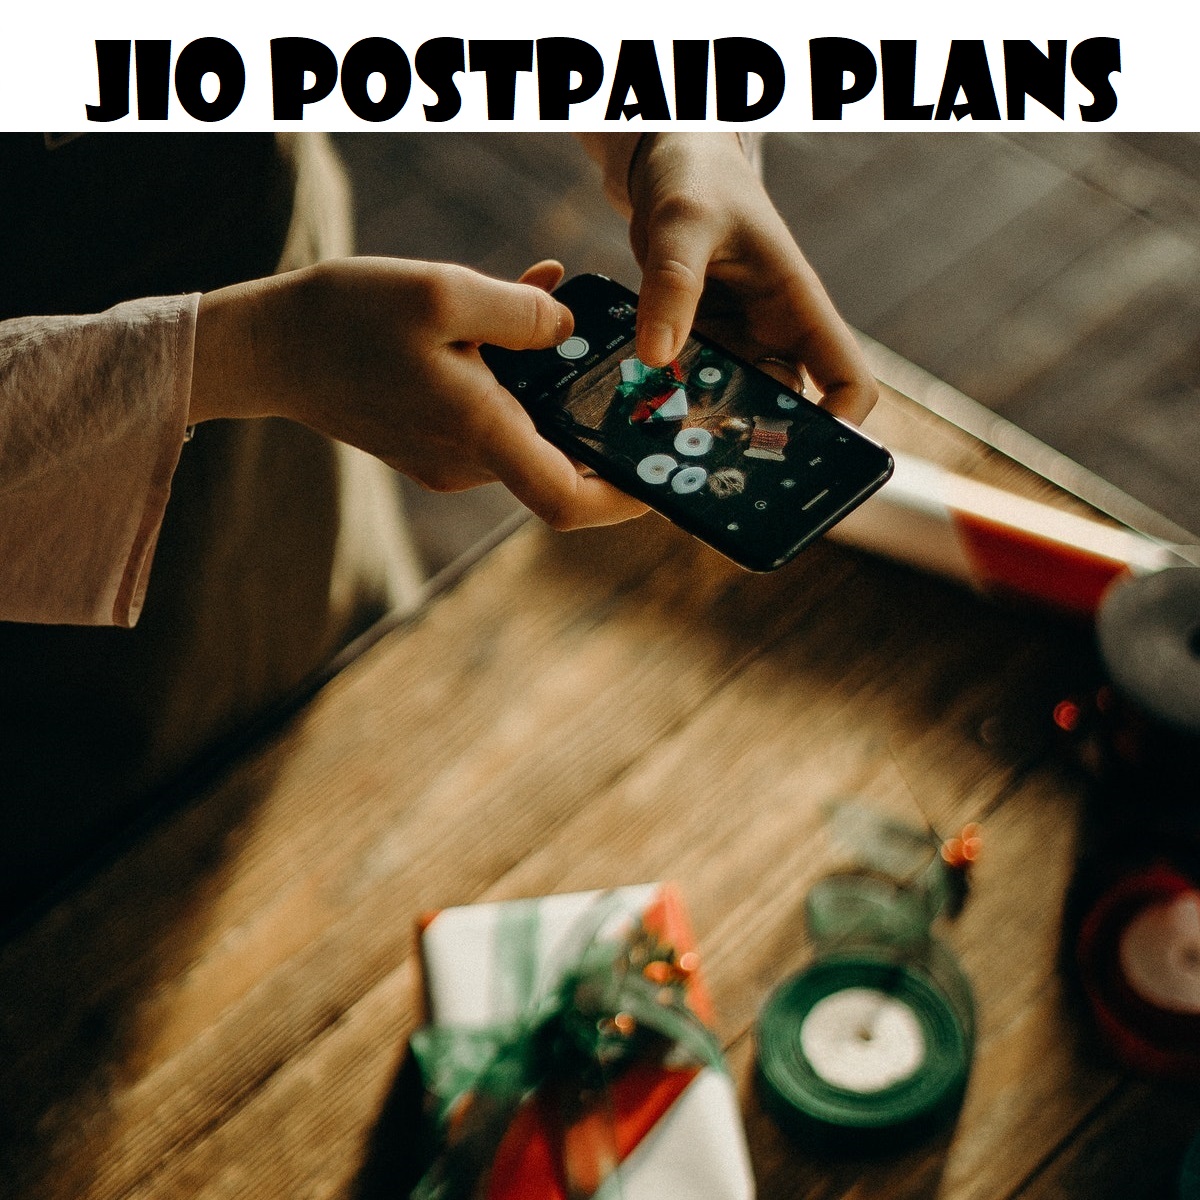 Jio postpaid plans; all tariffs from Rs 199 to Rs 1,499 detailed 